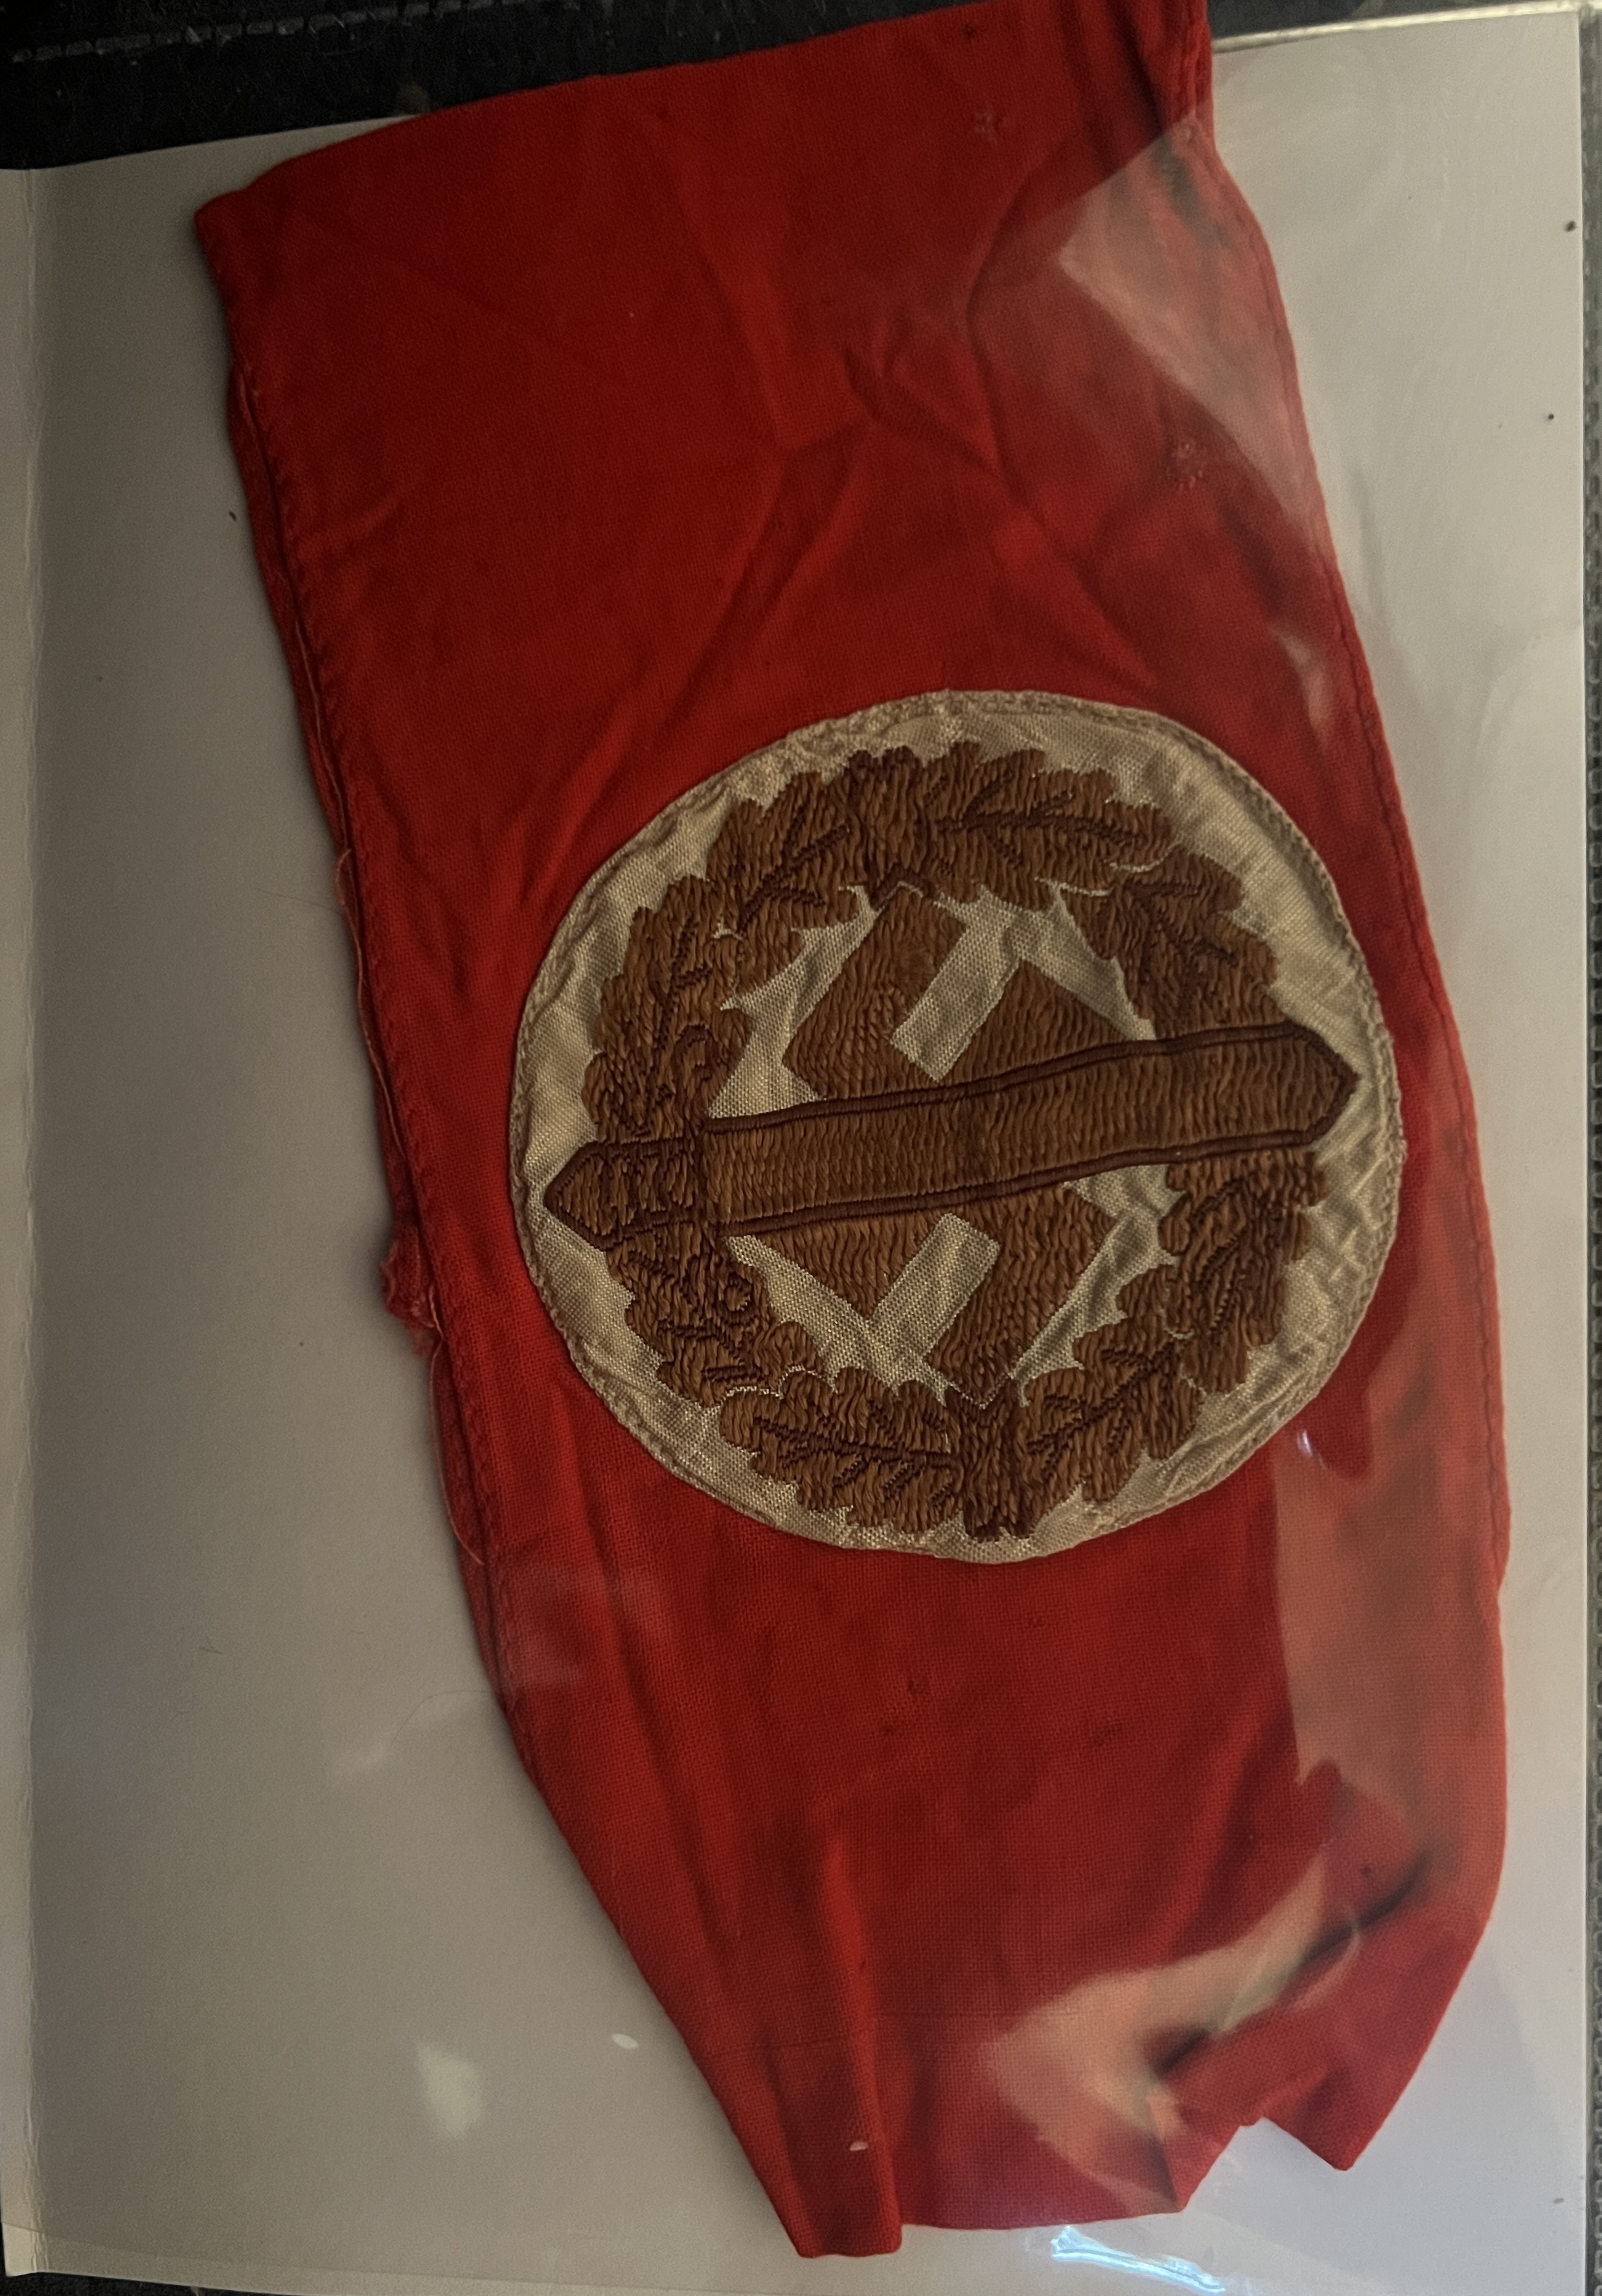 golden swastika, sword and wreath within white circle upon red band, not as bold as standard NSDAP armband